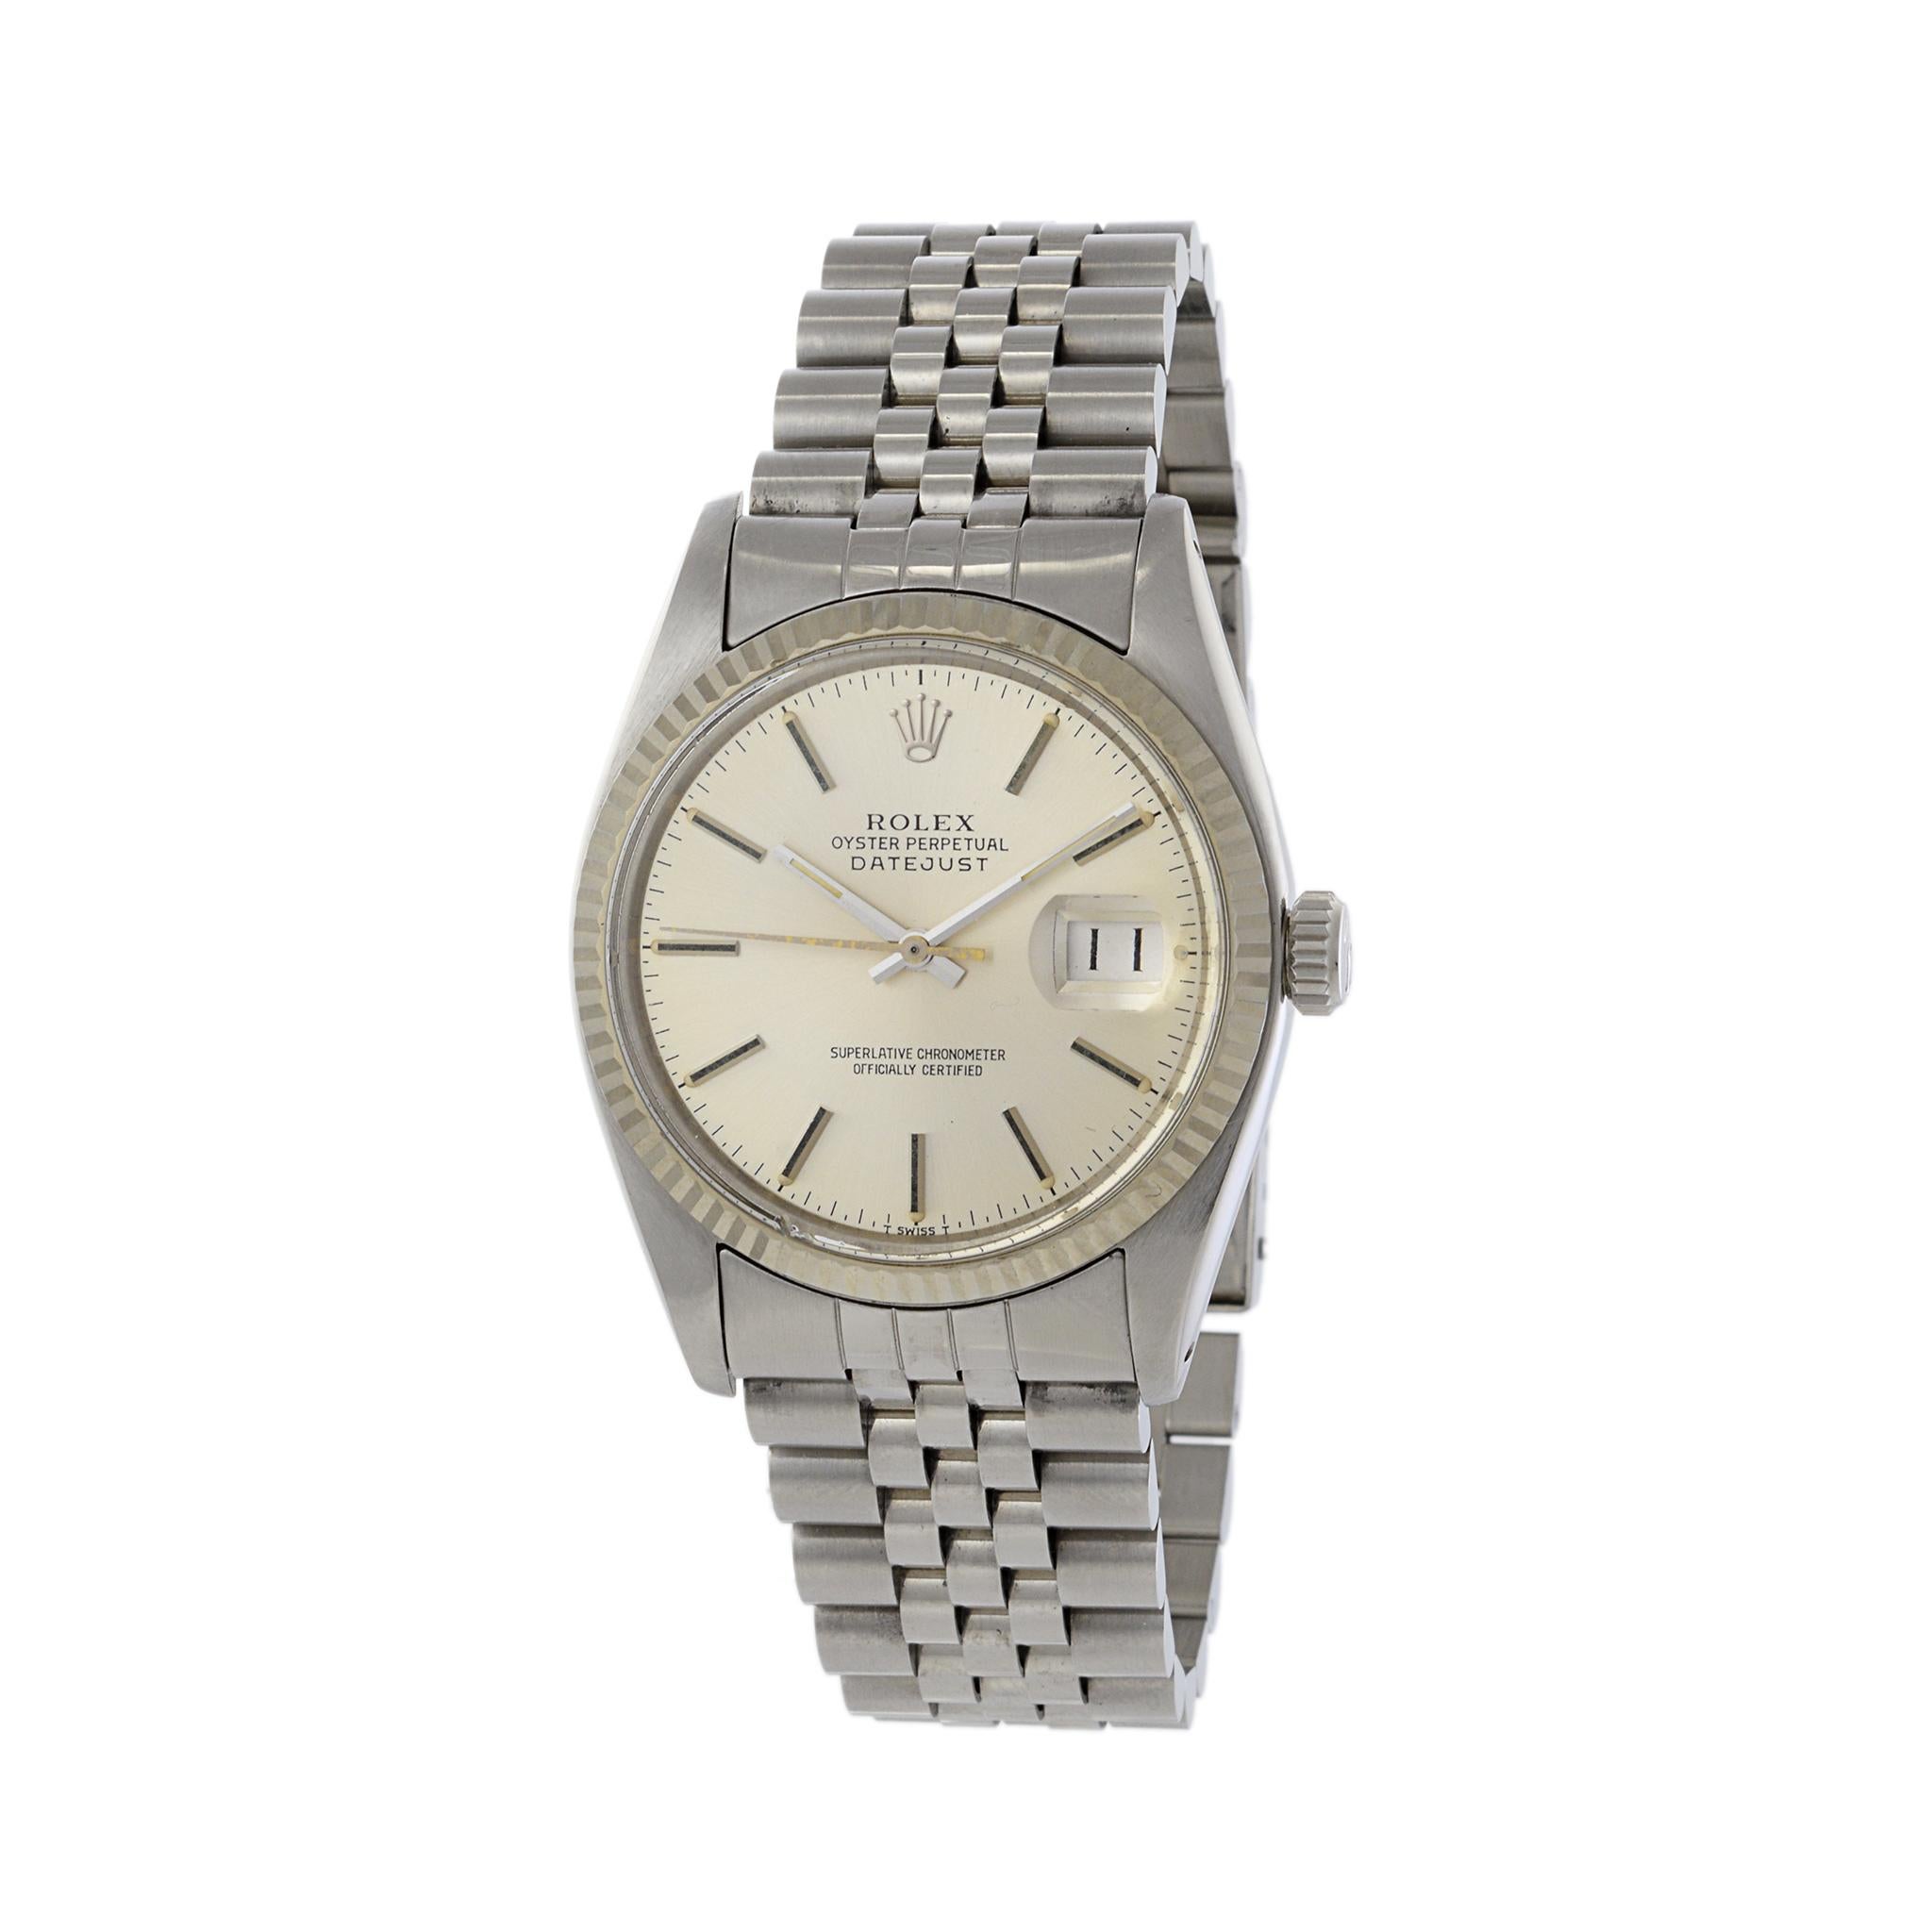 The Rolex 16014 is a refined timepiece that embodies the timeless elegance and superior craftsmanship synonymous with the Rolex brand. Part of the esteemed Datejust collection, the 16014 model carries forward Rolex's legacy of precision and